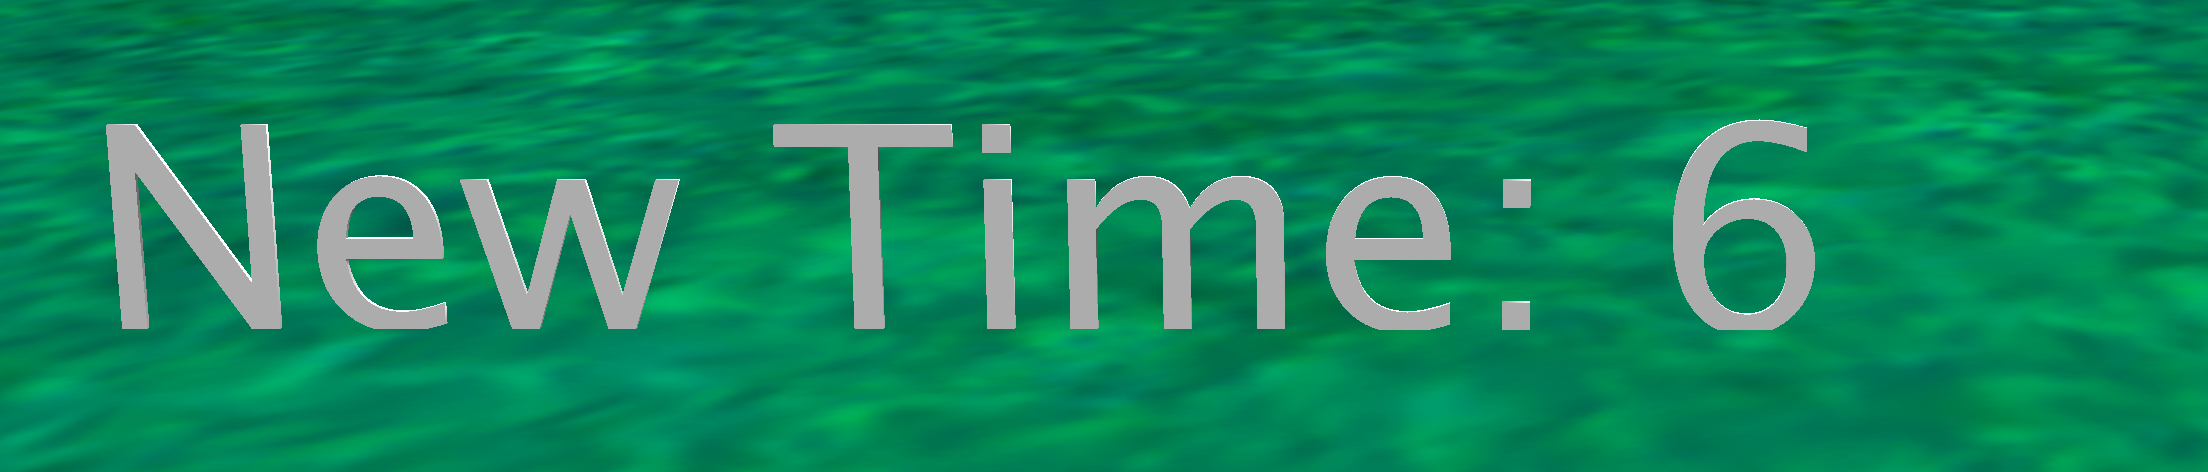 Timer on screen